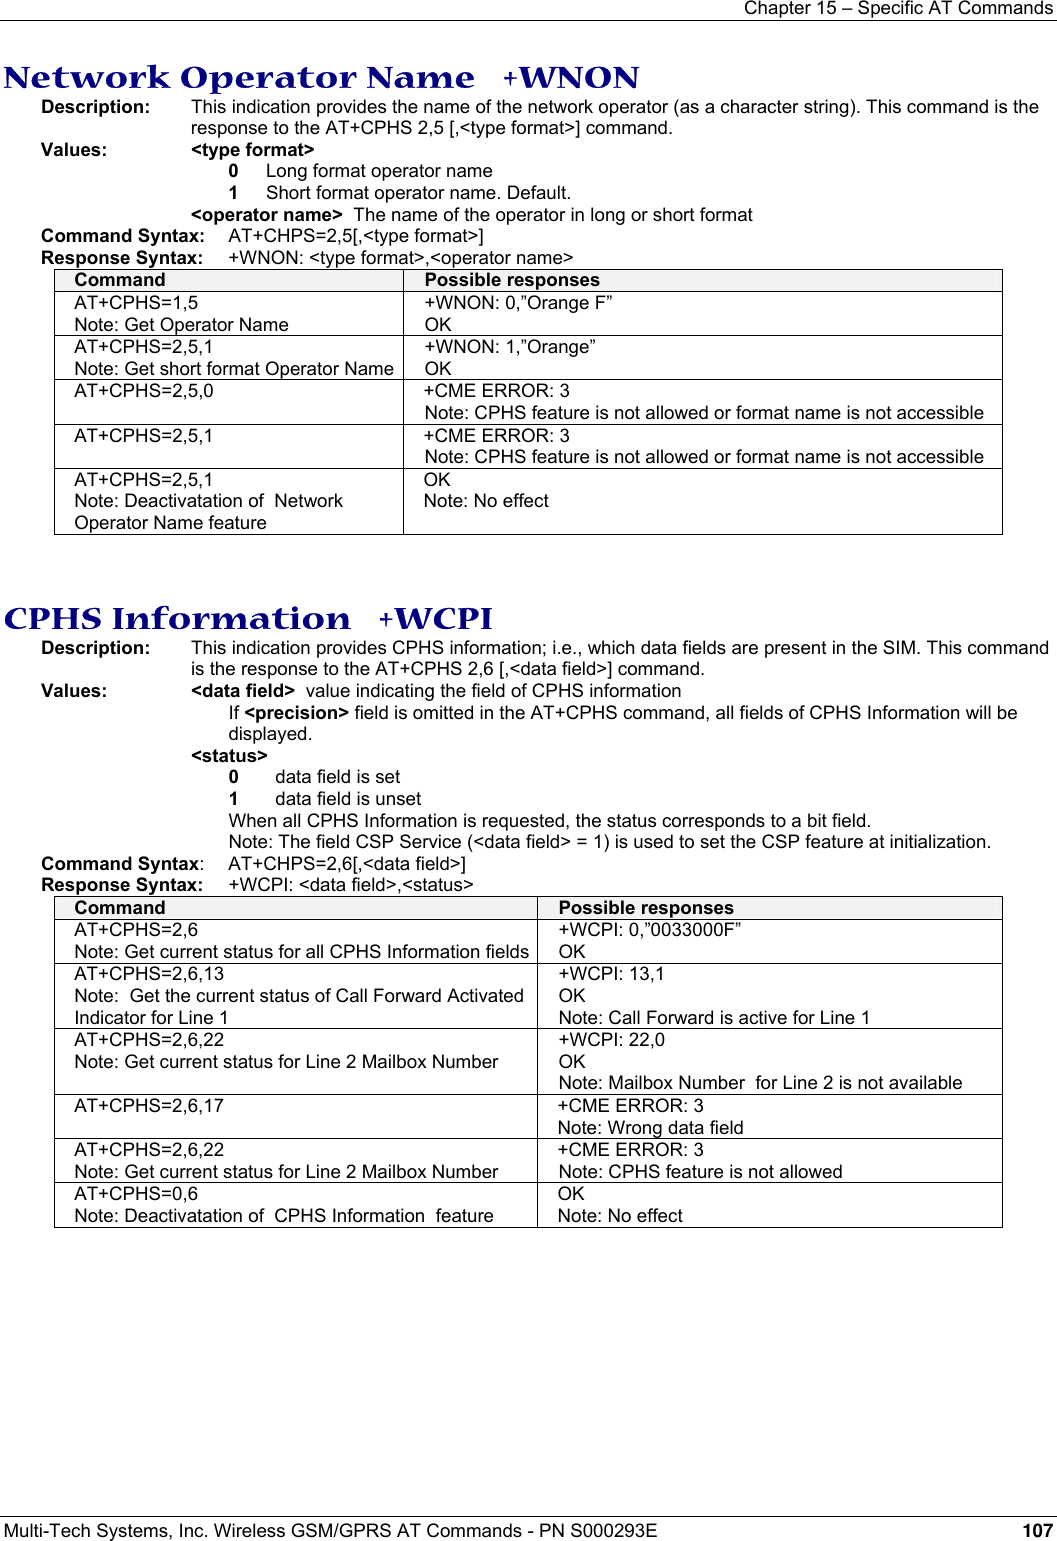 Chapter 15 – Specific AT Commands  Multi-Tech Systems, Inc. Wireless GSM/GPRS AT Commands - PN S000293E 107  Network Operator Name   +WNON Description:  This indication provides the name of the network operator (as a character string). This command is the response to the AT+CPHS 2,5 [,&lt;type format&gt;] command. Values: &lt;type format&gt;  0  Long format operator name 1   Short format operator name. Default. &lt;operator name&gt;  The name of the operator in long or short format   Command Syntax: AT+CHPS=2,5[,&lt;type format&gt;] Response Syntax:  +WNON: &lt;type format&gt;,&lt;operator name&gt;   Command  Possible responses AT+CPHS=1,5 Note: Get Operator Name +WNON: 0,”Orange F” OK AT+CPHS=2,5,1 Note: Get short format Operator Name +WNON: 1,”Orange” OK AT+CPHS=2,5,0  +CME ERROR: 3 Note: CPHS feature is not allowed or format name is not accessible AT+CPHS=2,5,1  +CME ERROR: 3 Note: CPHS feature is not allowed or format name is not accessible AT+CPHS=2,5,1 Note: Deactivatation of  Network Operator Name feature OK Note: No effect   CPHS Information   +WCPI Description:  This indication provides CPHS information; i.e., which data fields are present in the SIM. This command is the response to the AT+CPHS 2,6 [,&lt;data field&gt;] command. Values: &lt;data field&gt;  value indicating the field of CPHS information    If &lt;precision&gt; field is omitted in the AT+CPHS command, all fields of CPHS Information will be displayed. &lt;status&gt;   0  data field is set 1   data field is unset When all CPHS Information is requested, the status corresponds to a bit field. Note: The field CSP Service (&lt;data field&gt; = 1) is used to set the CSP feature at initialization.   Command Syntax: AT+CHPS=2,6[,&lt;data field&gt;] Response Syntax:  +WCPI: &lt;data field&gt;,&lt;status&gt;  Command  Possible responses AT+CPHS=2,6 Note: Get current status for all CPHS Information fields+WCPI: 0,”0033000F” OK AT+CPHS=2,6,13 Note:  Get the current status of Call Forward Activated Indicator for Line 1 +WCPI: 13,1 OK Note: Call Forward is active for Line 1 AT+CPHS=2,6,22 Note: Get current status for Line 2 Mailbox Number +WCPI: 22,0 OK Note: Mailbox Number  for Line 2 is not available AT+CPHS=2,6,17  +CME ERROR: 3 Note: Wrong data field AT+CPHS=2,6,22 Note: Get current status for Line 2 Mailbox Number +CME ERROR: 3 Note: CPHS feature is not allowed  AT+CPHS=0,6 Note: Deactivatation of  CPHS Information  feature OK Note: No effect  